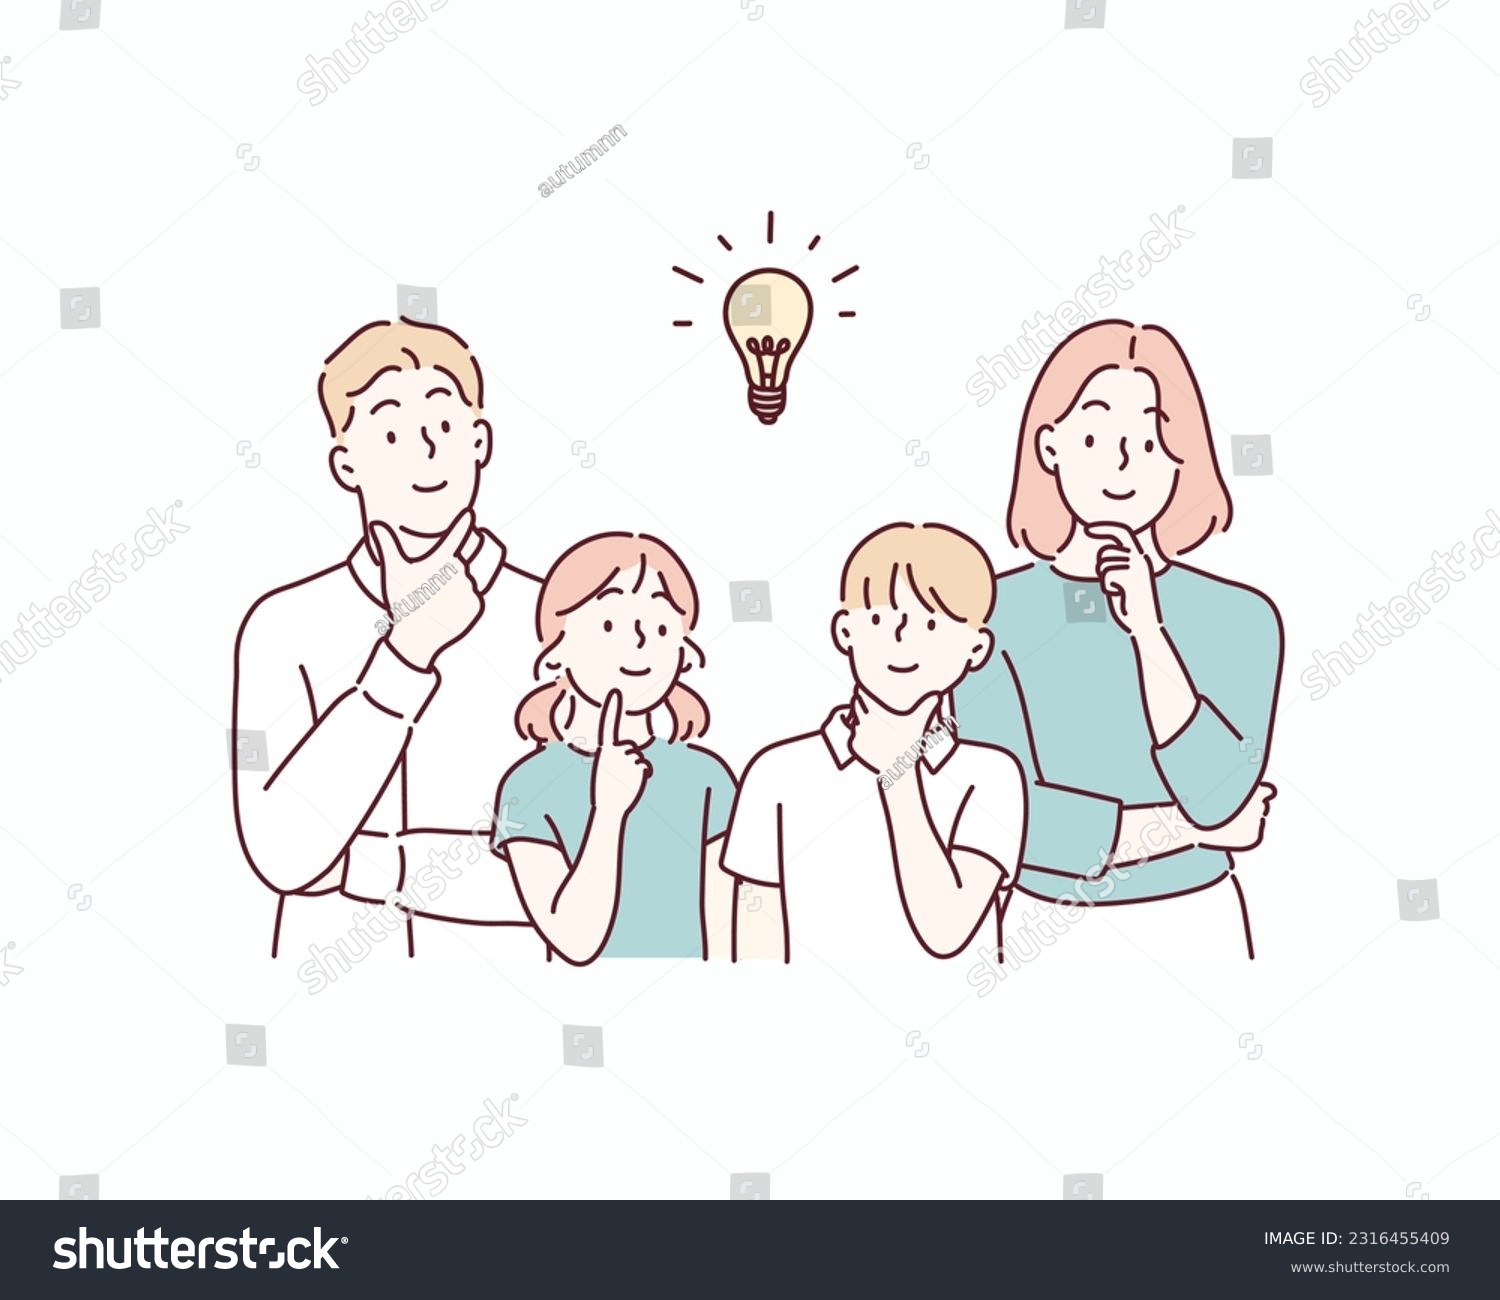 Illustration of family.Questions, solutions, knowledge, learning, children, education. Hand drawn style vector design illustrations. #2316455409